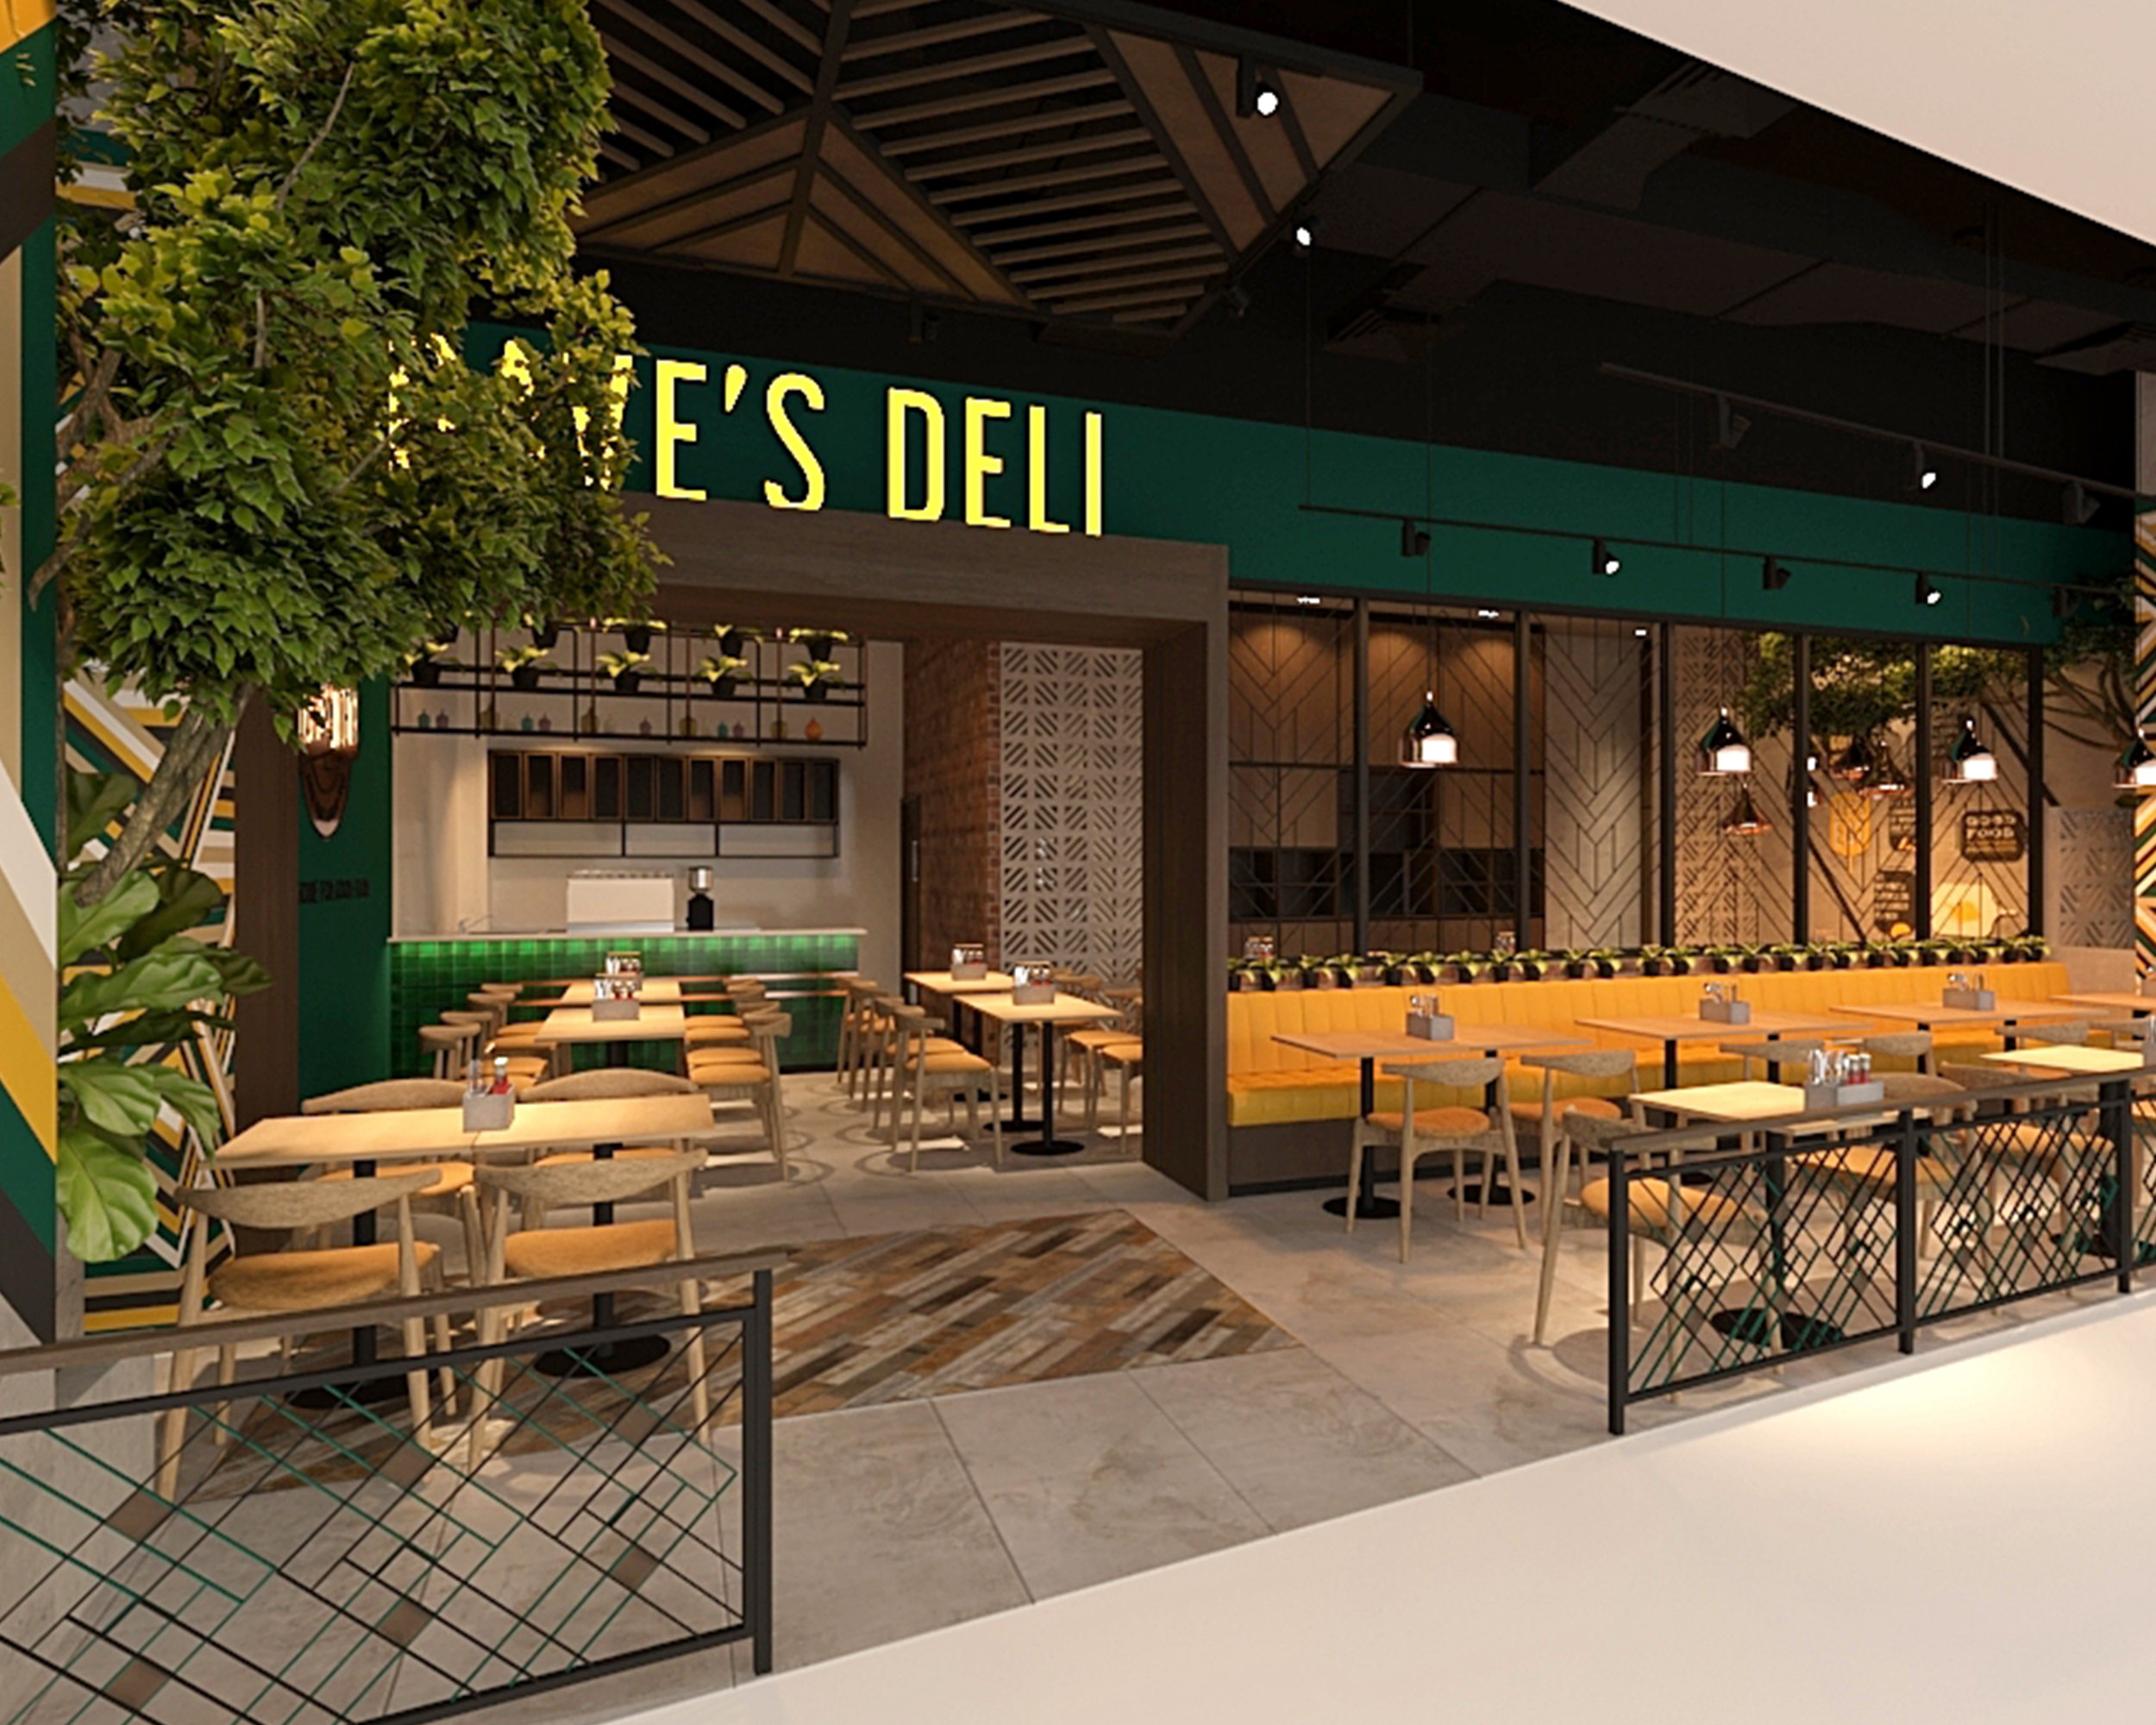 acpdesign_homepage_ourproject_davesdeli